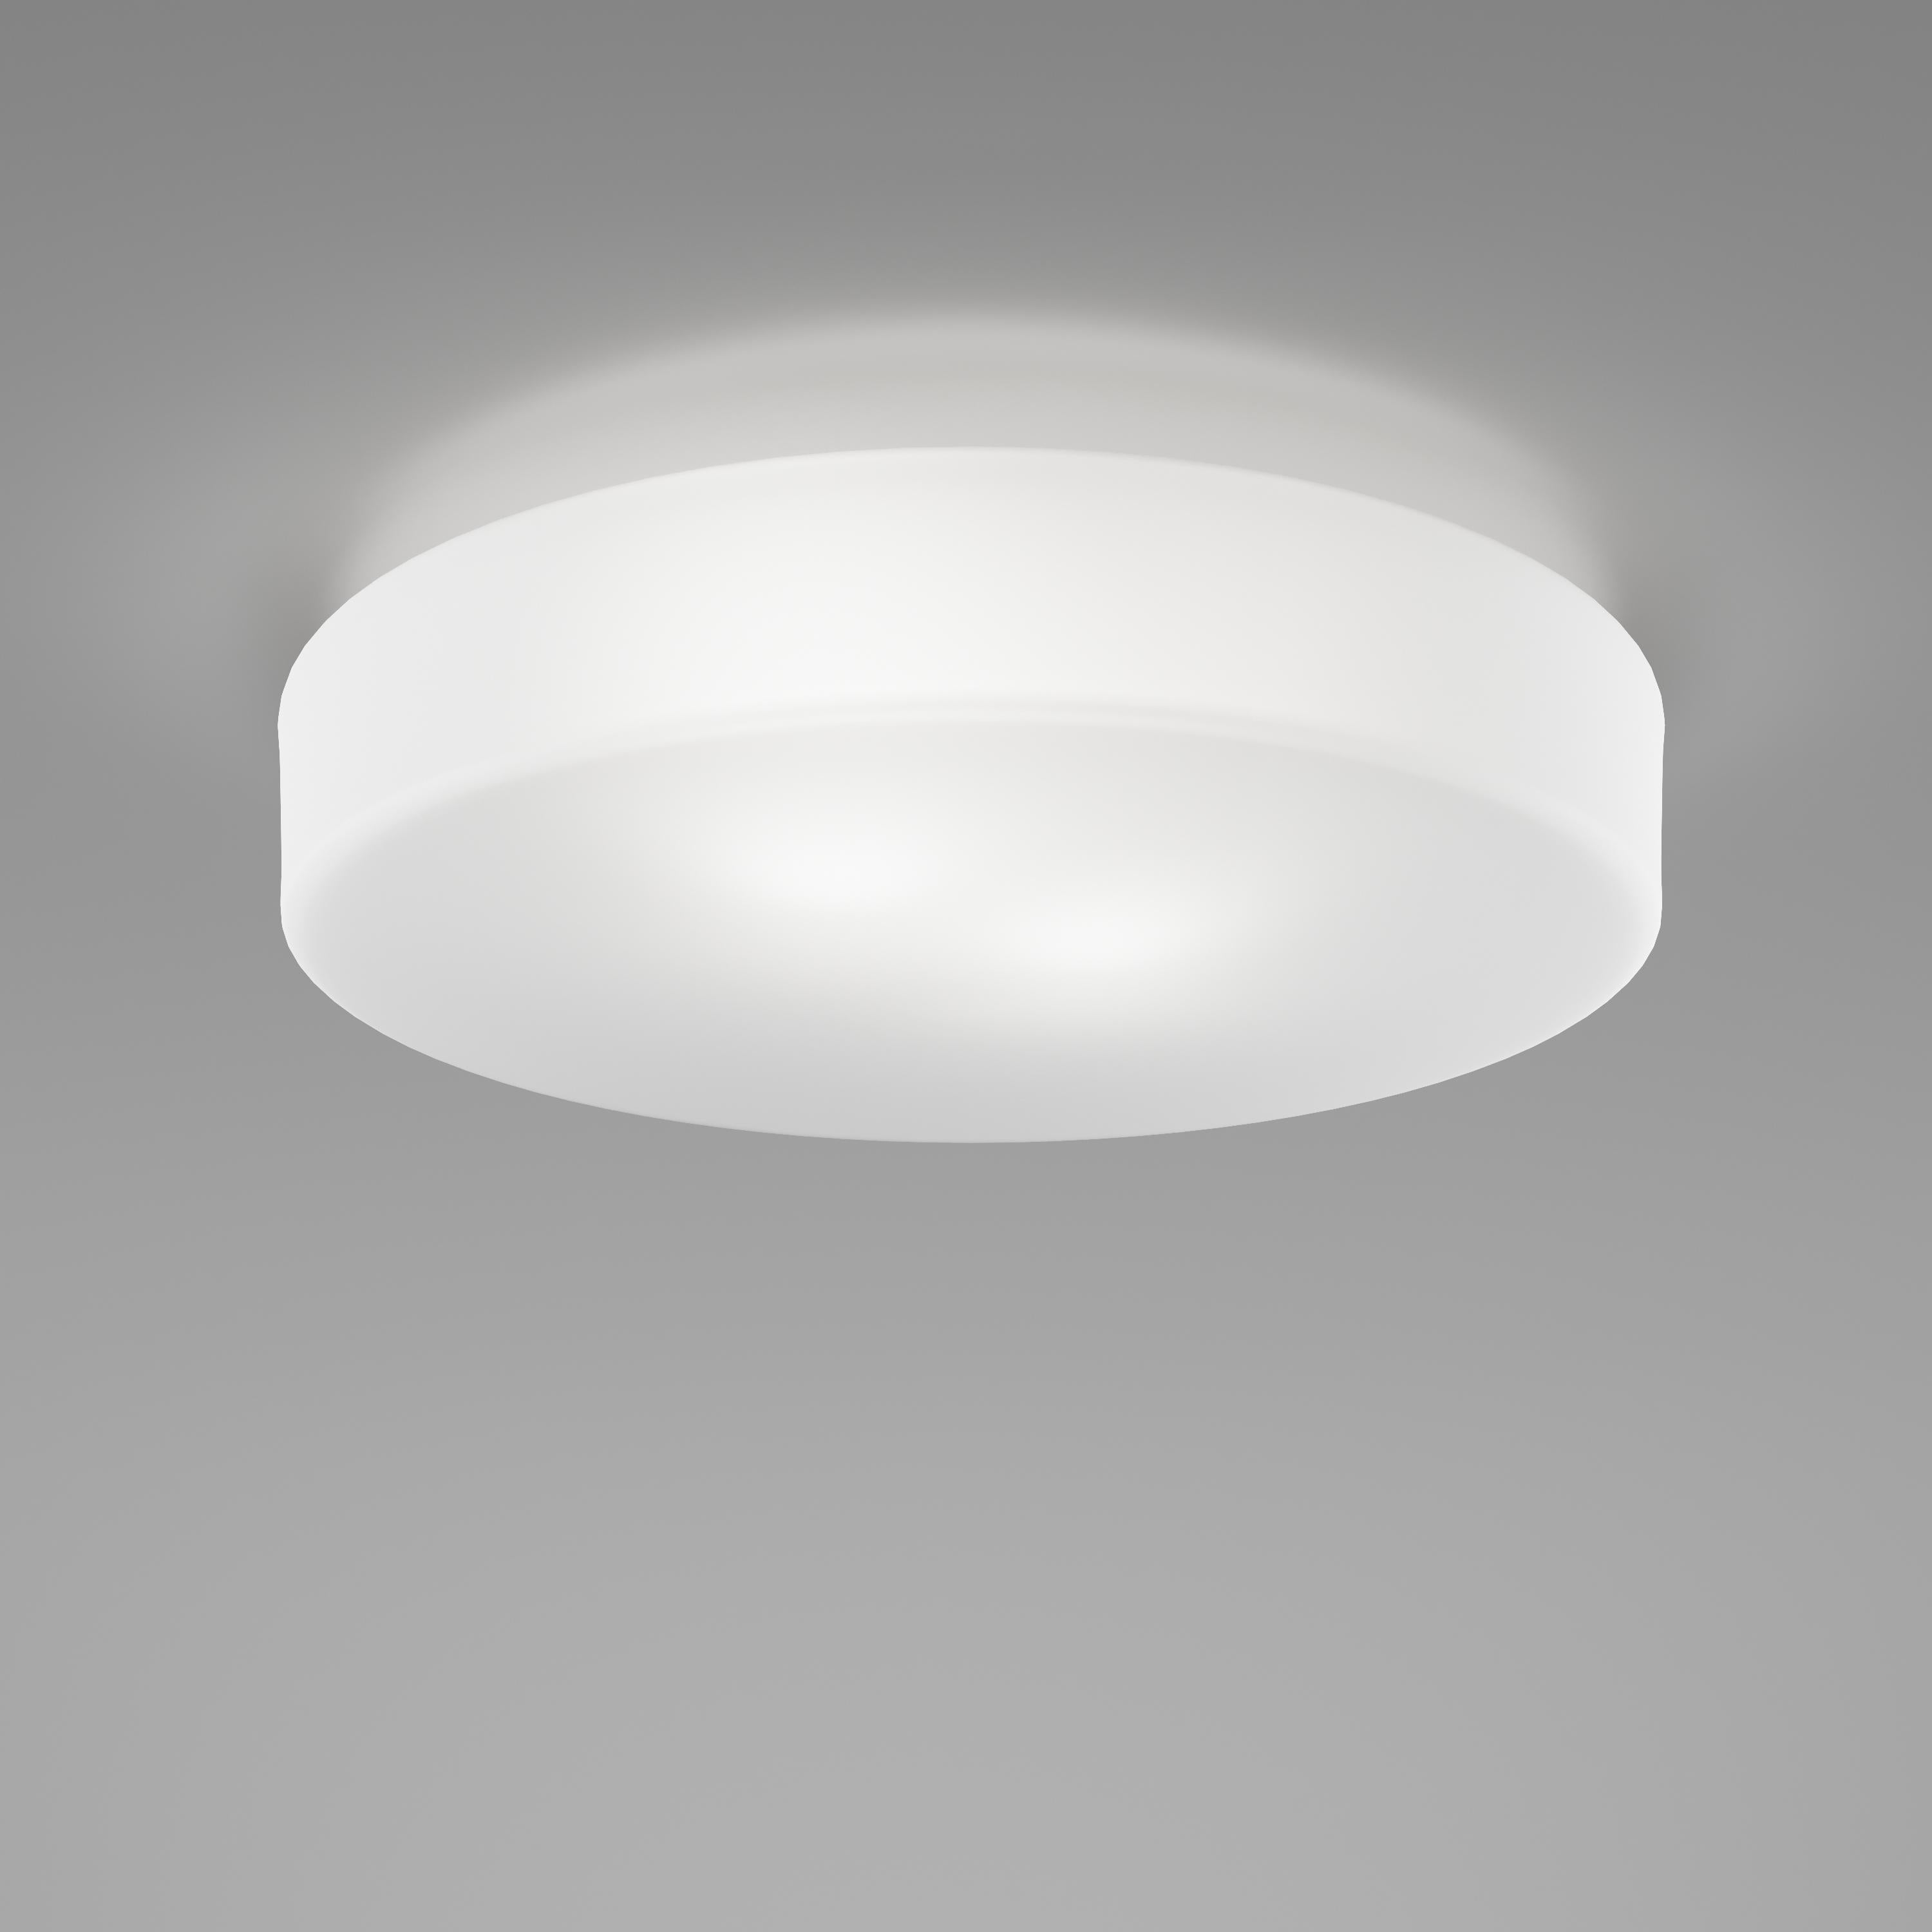 Available in two sizes, Sogno can be fitted both as a ceiling and as a wall lamp. The satin-finish blown glass helps to create a soft ambient light.

Specifications:
Material: Glass
Light source: E26 UL
No of bulbs: 2x60W E26 UL